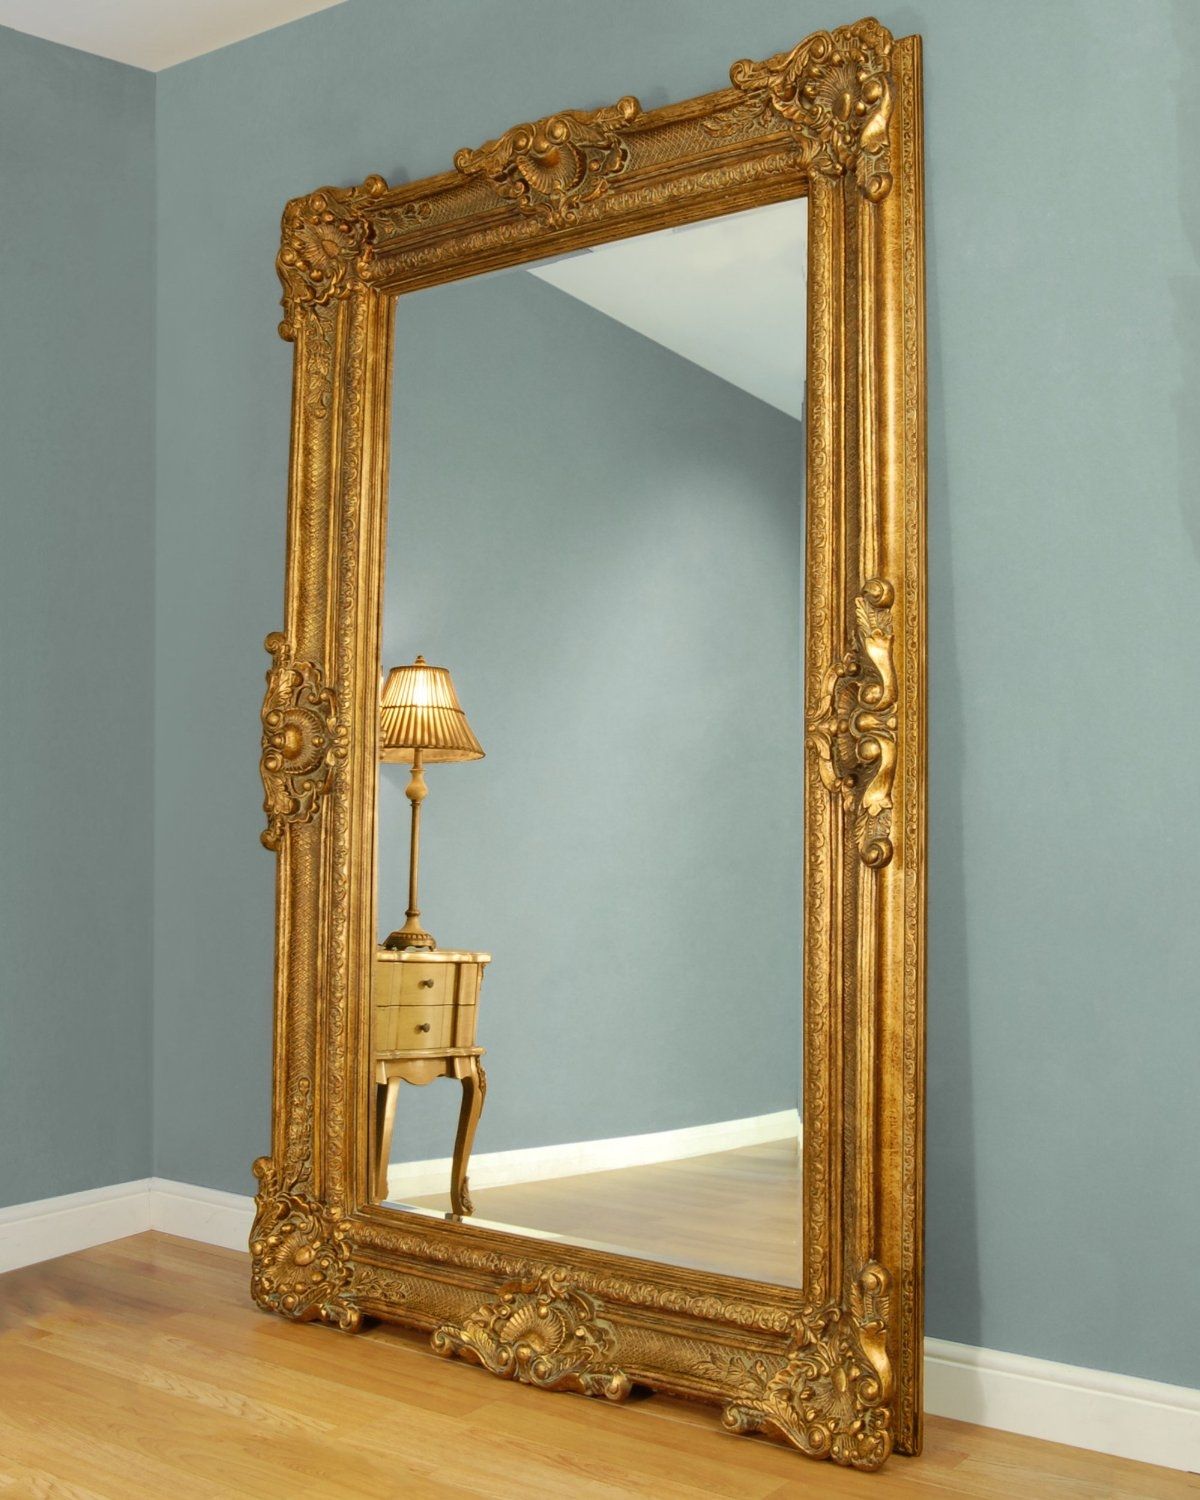 Gold Framed Mirror Imperial Gold Framed Mirror Max Size 20 X24 Inside Large Ornate Gold Mirror (View 10 of 15)